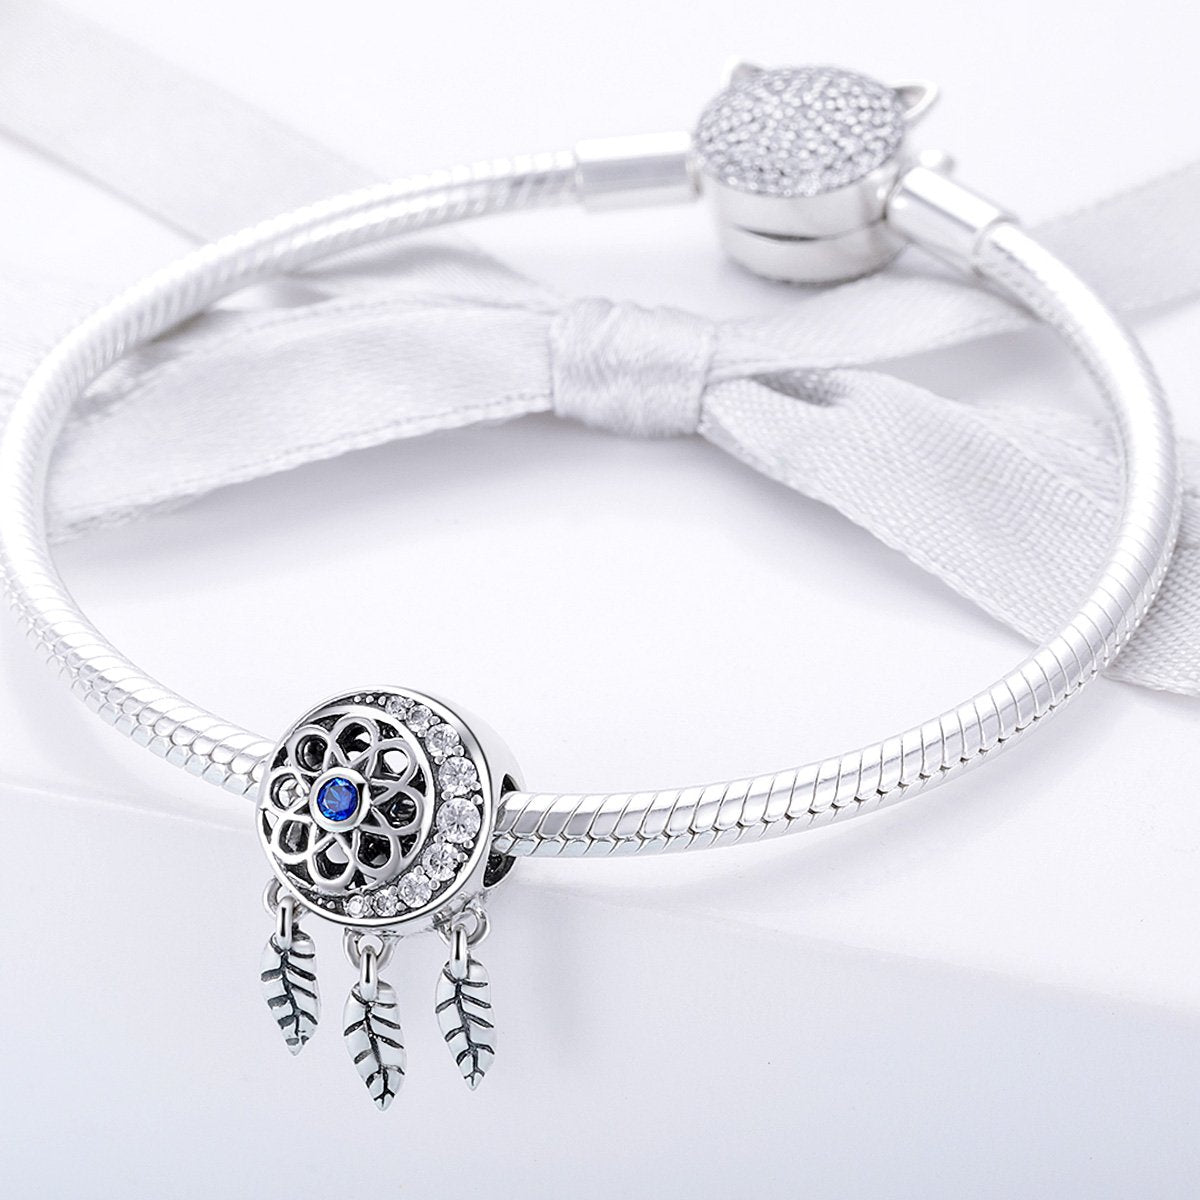 Sterling 925 silver charm the statellite to the moon fits Pandora charm and European charm bracelet Xaxe.com